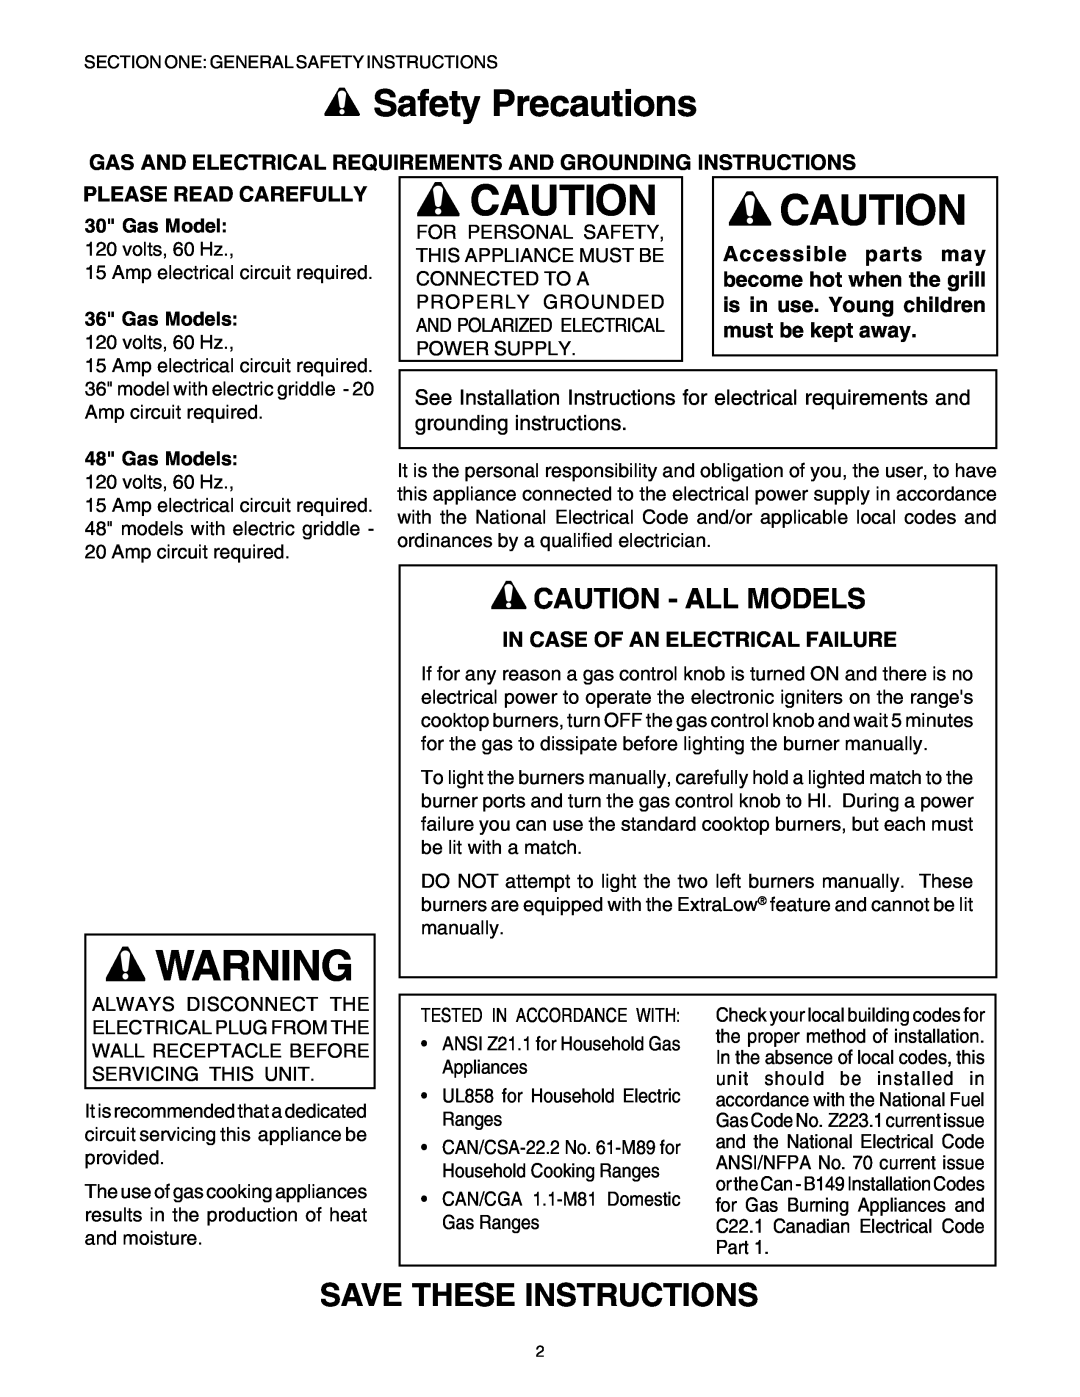 Thermador PG30 Safety Precautions, Save These Instructions, Caution - All Models, Please Read Carefully, Gas Model 